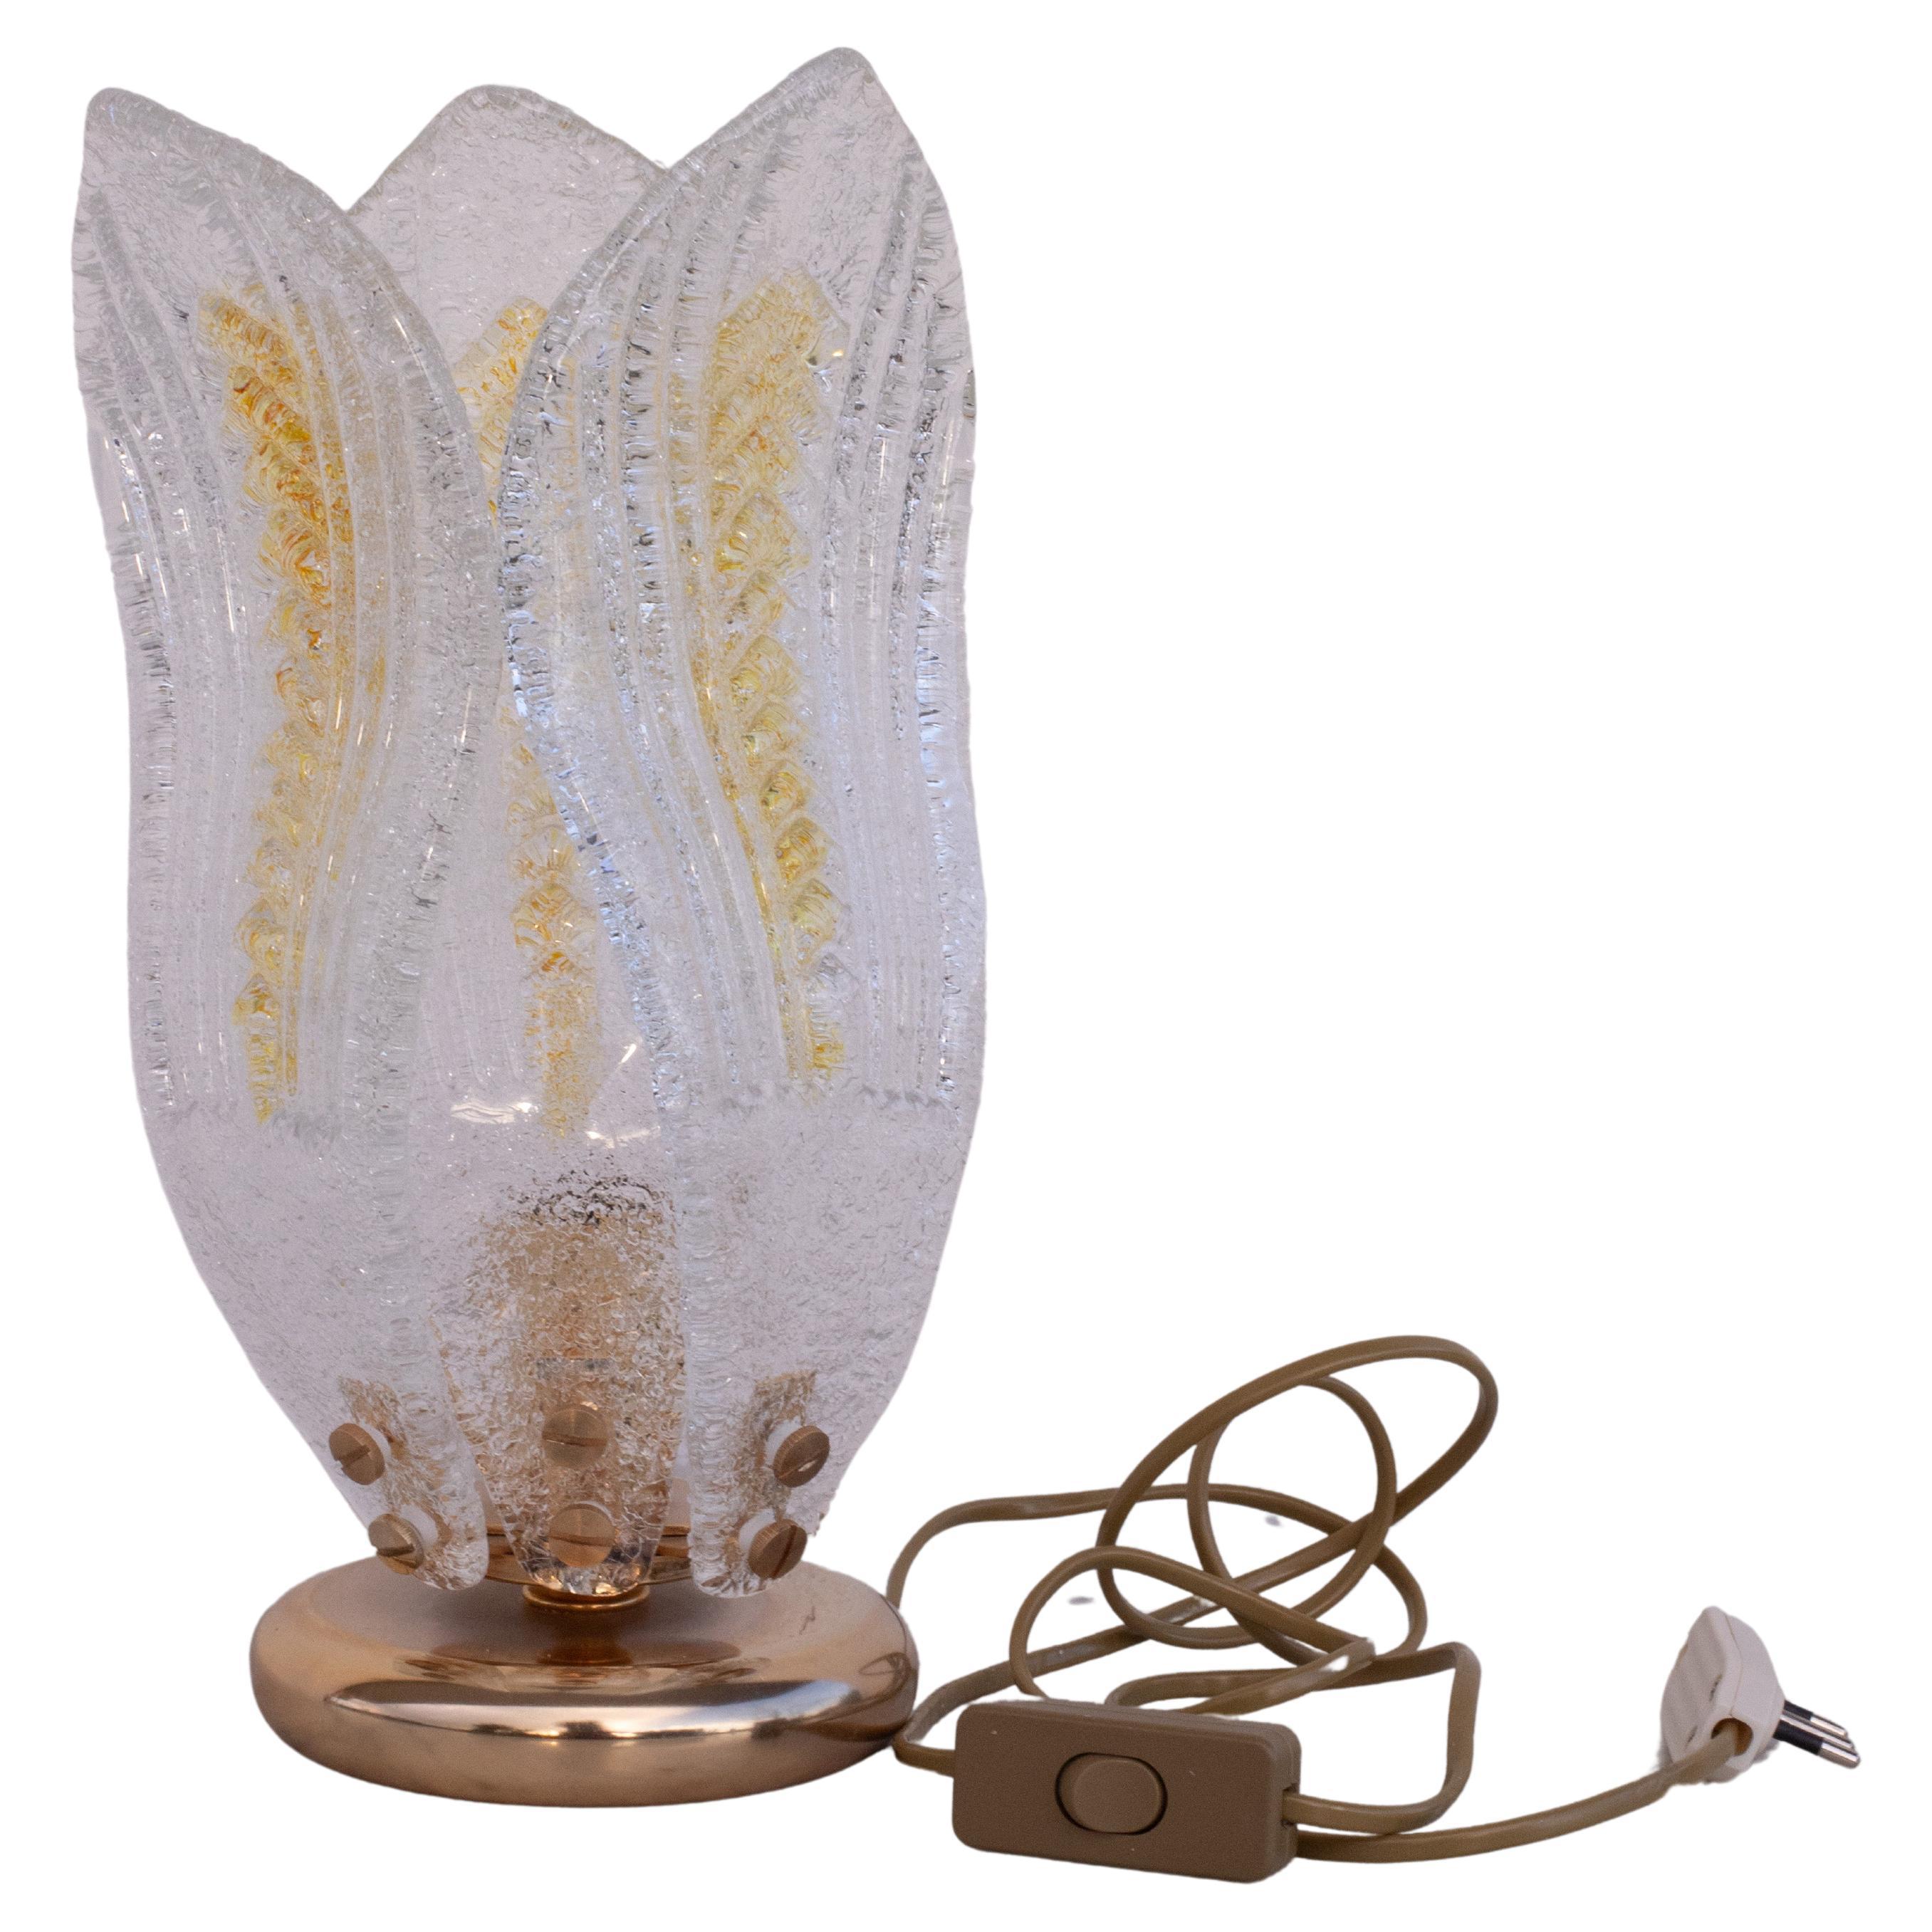 abatjour table lamps decorated with tree leaves yellow and trasparent in Murano glass.
Excellent vintage condition.
The lamp mounts an e14 socket, possibility of wiring for Usa.
Height 32 centimeters, diameter 16 centimeters.